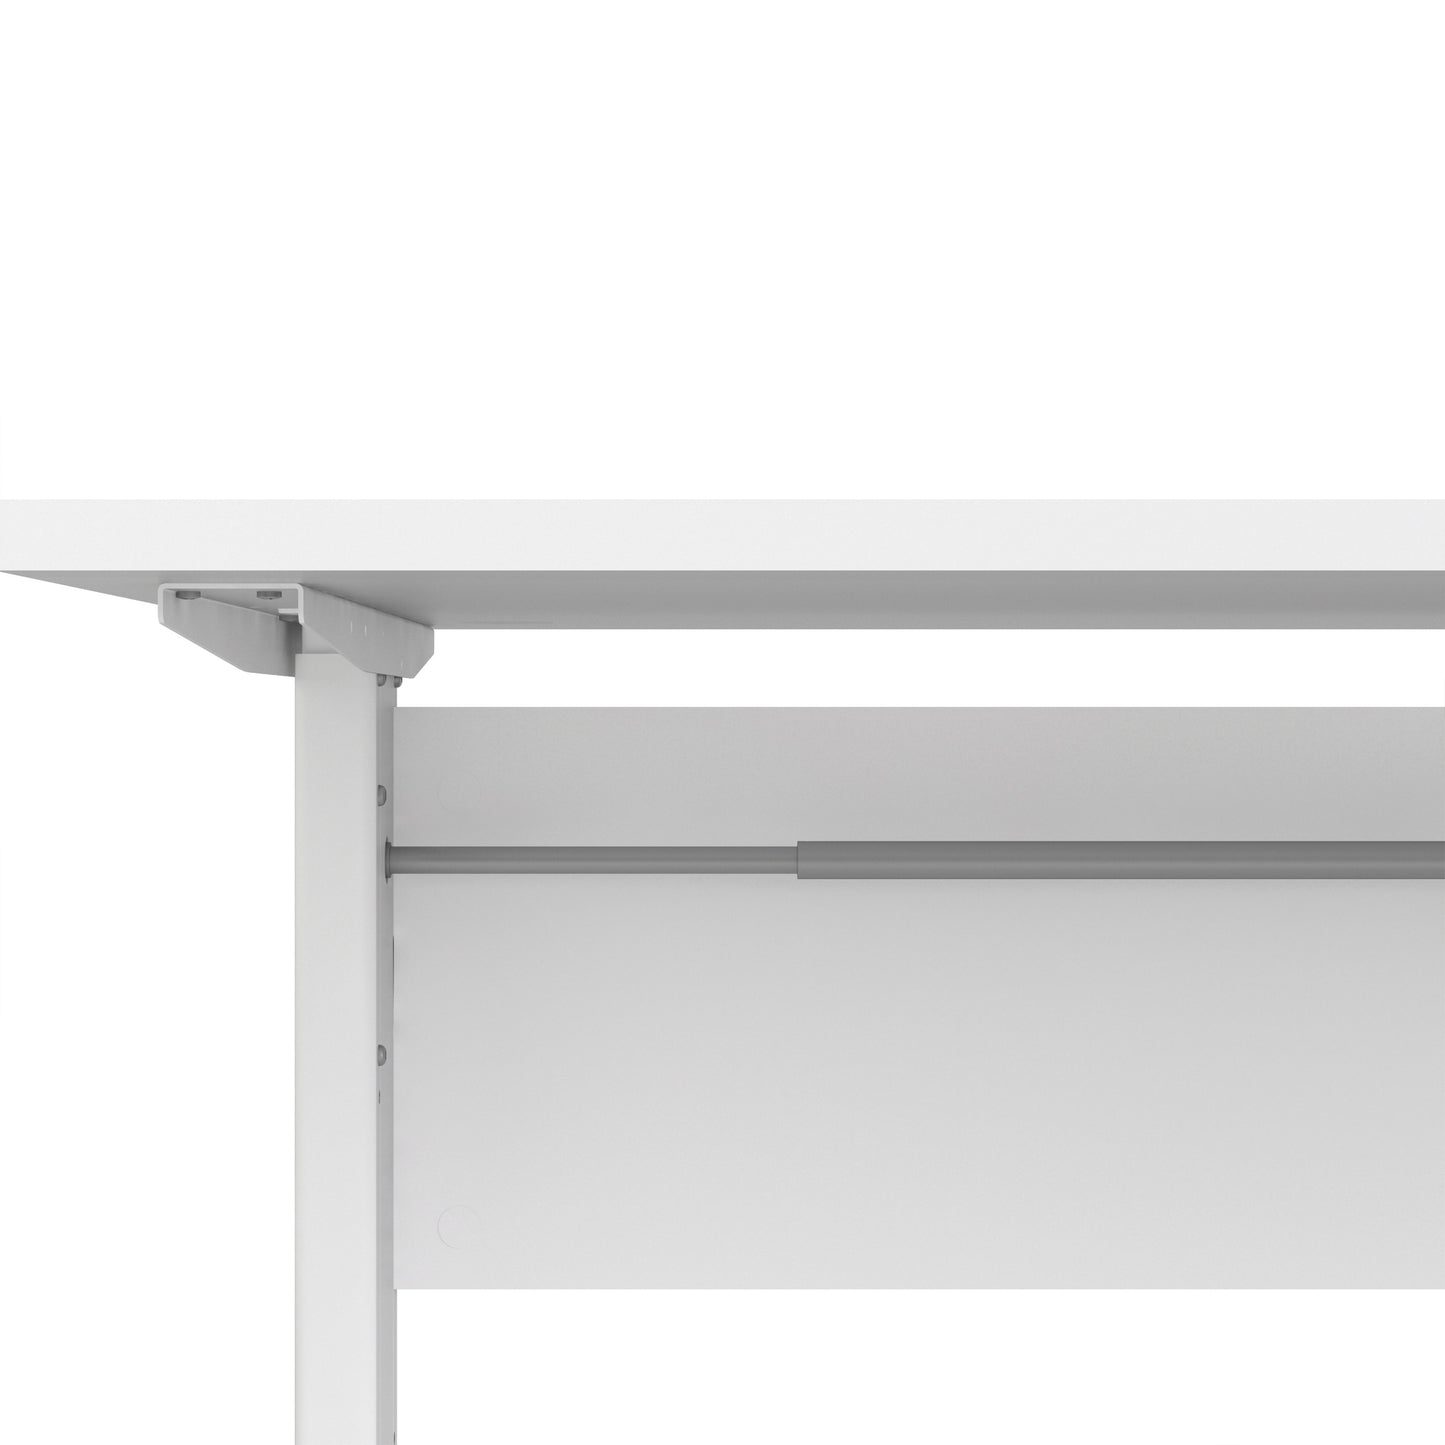 Prima  Desk 150 cm in White with Height adjustable legs with electric control in White